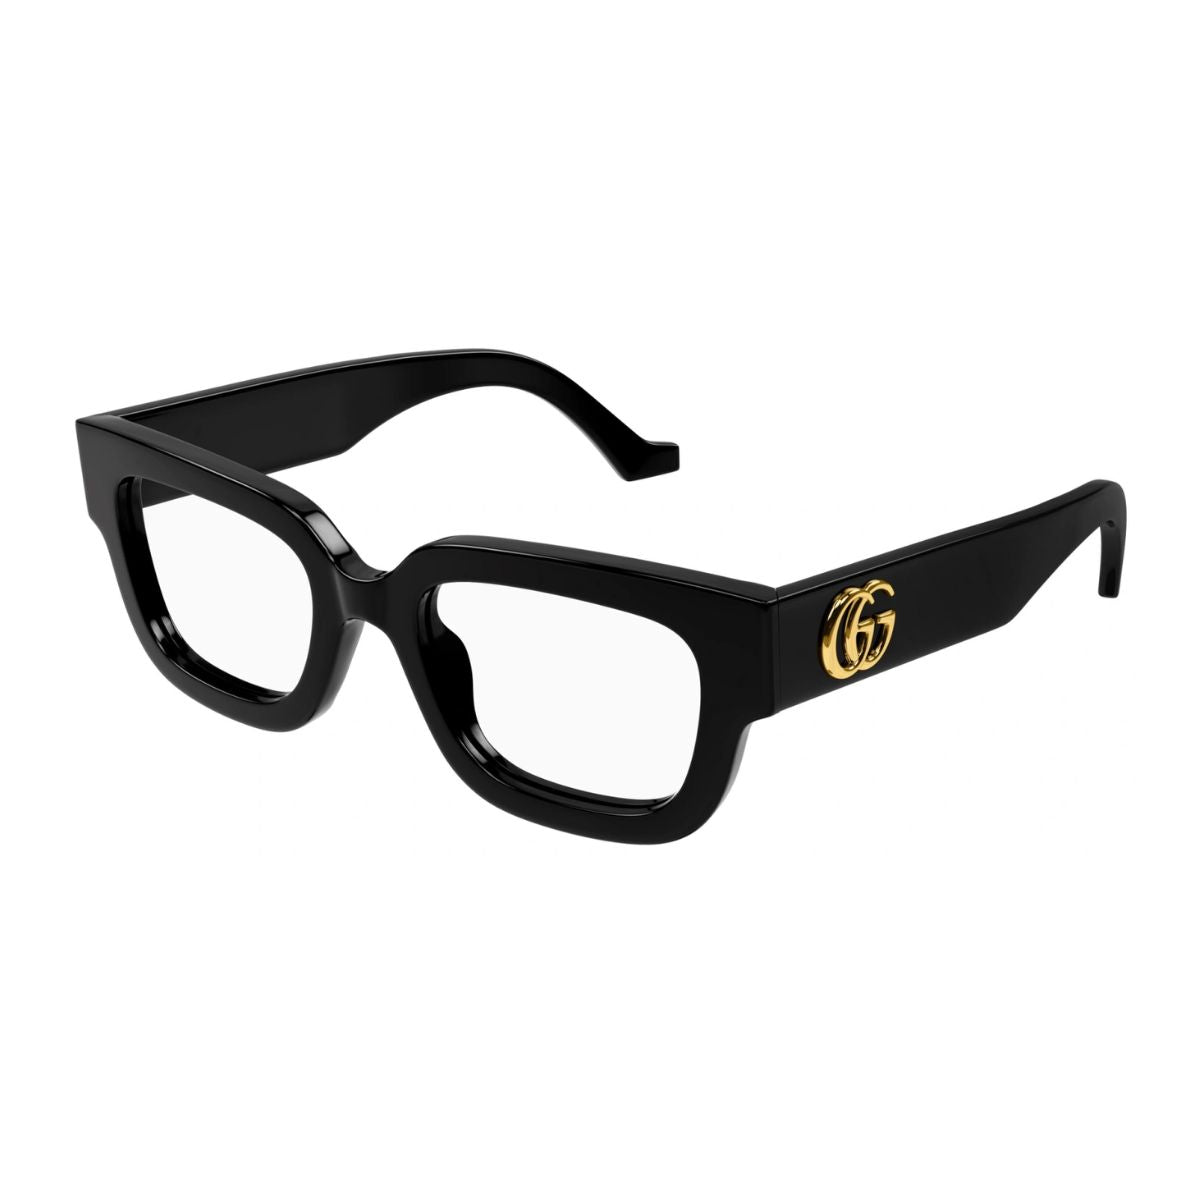  "Gucci 1548O 001 Frames - Versatile eyewear designed for all genders, available at Optorium."